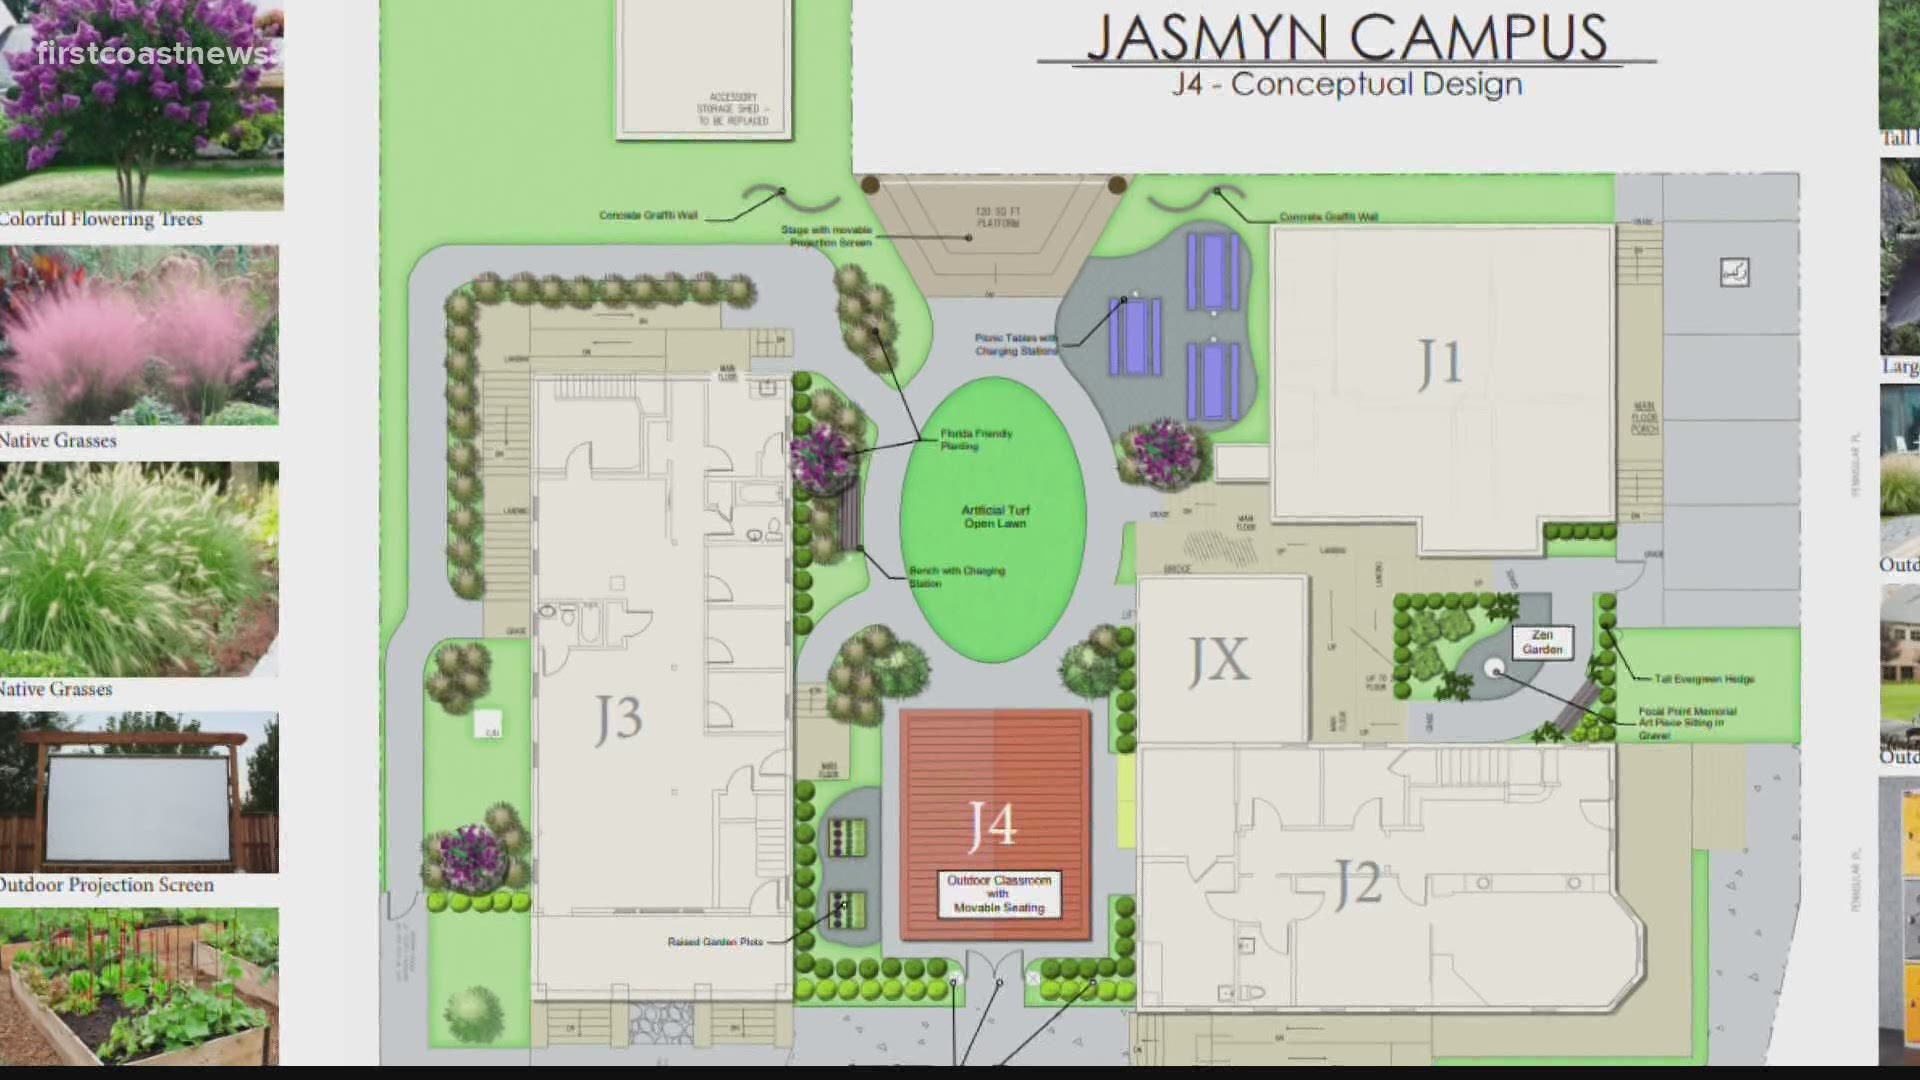 On Wednesday, JASMYN announced the final stage of its $1.5 million campaign that will provide campus enhancements to benefit the LGBTQ+ youth the group serves.